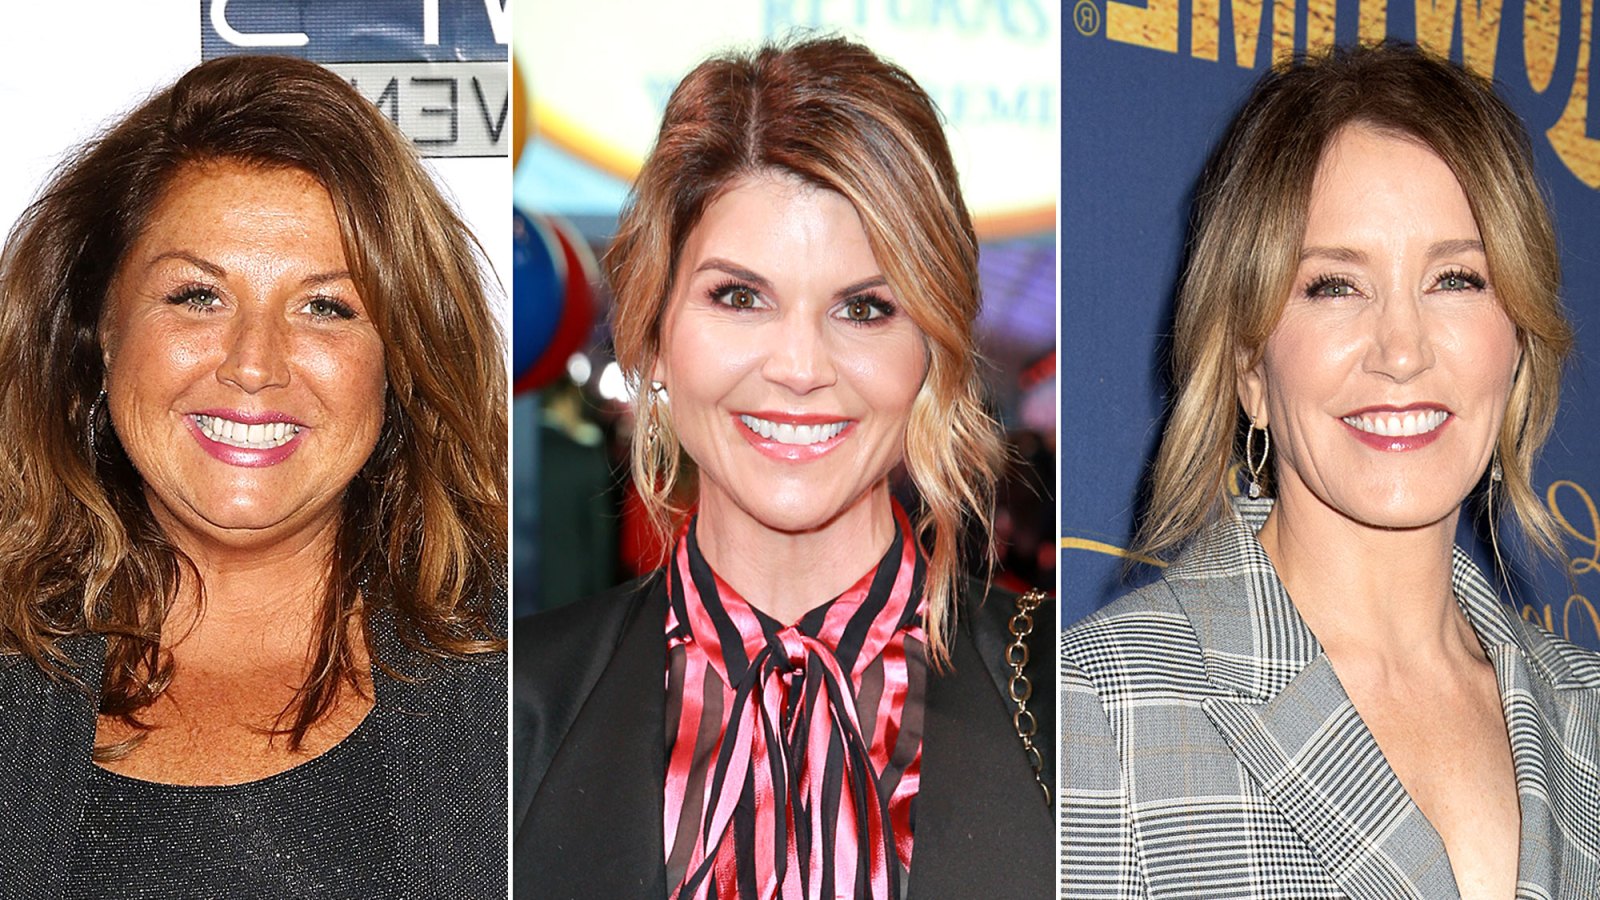 Abby Lee Miller Offers Prison Advice for Lori Loughlin and Felicity Huffman